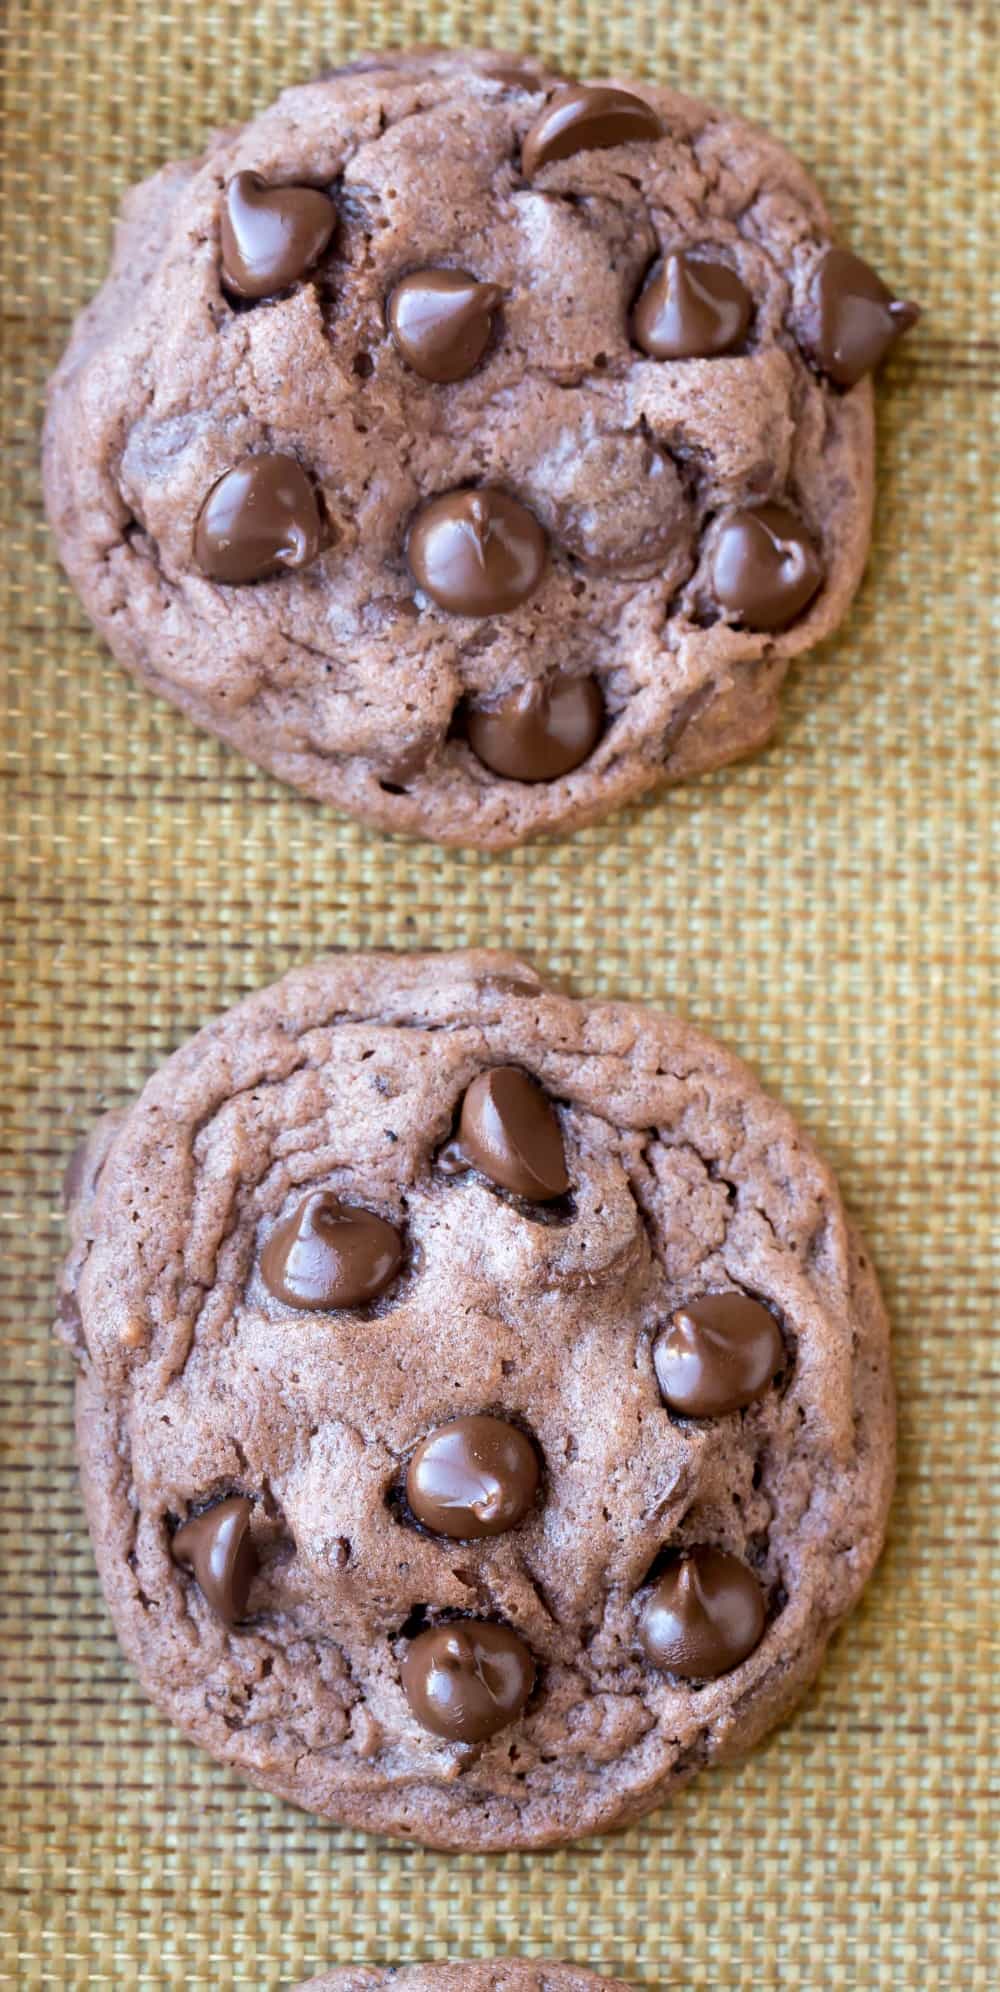 Chocolate Chocolate Chip Pudding Cookies on a baking mat